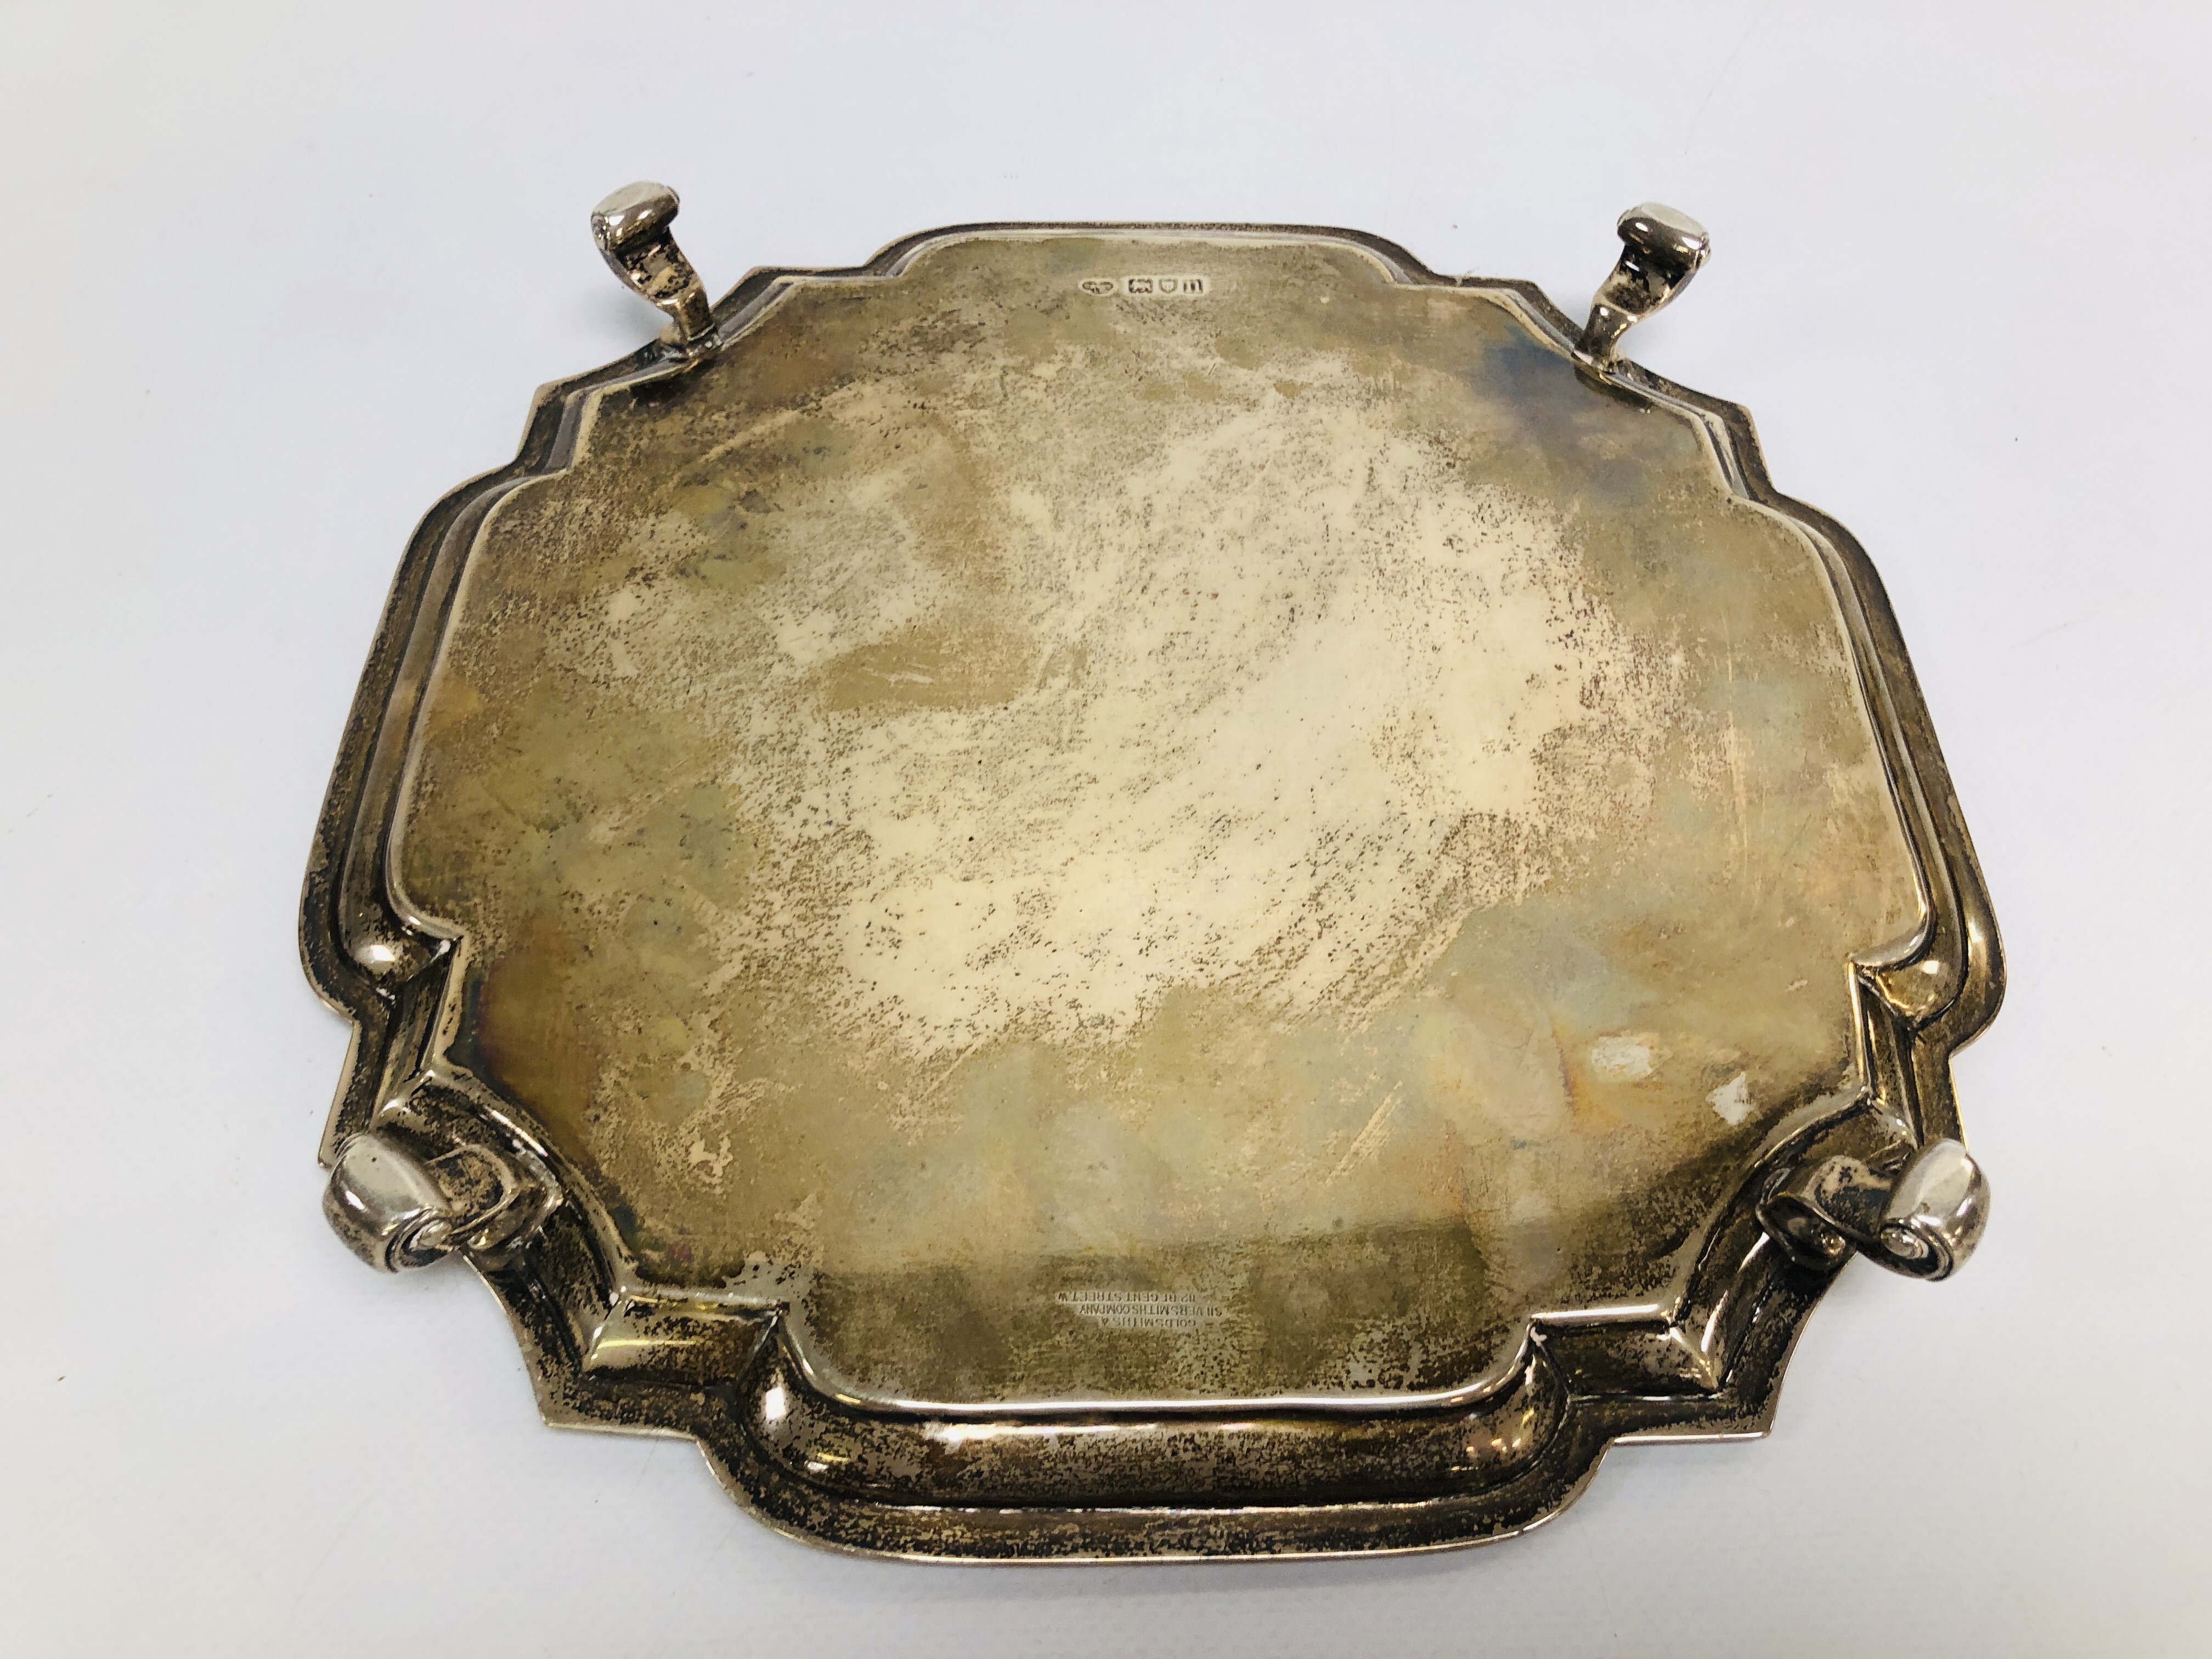 A SILVER PRESENTATION SALVER INSCRIBED 'PRESENTED TO WILLIAM RADFORD...' DATED 1948, LONDON ASSAY. - Image 7 of 10